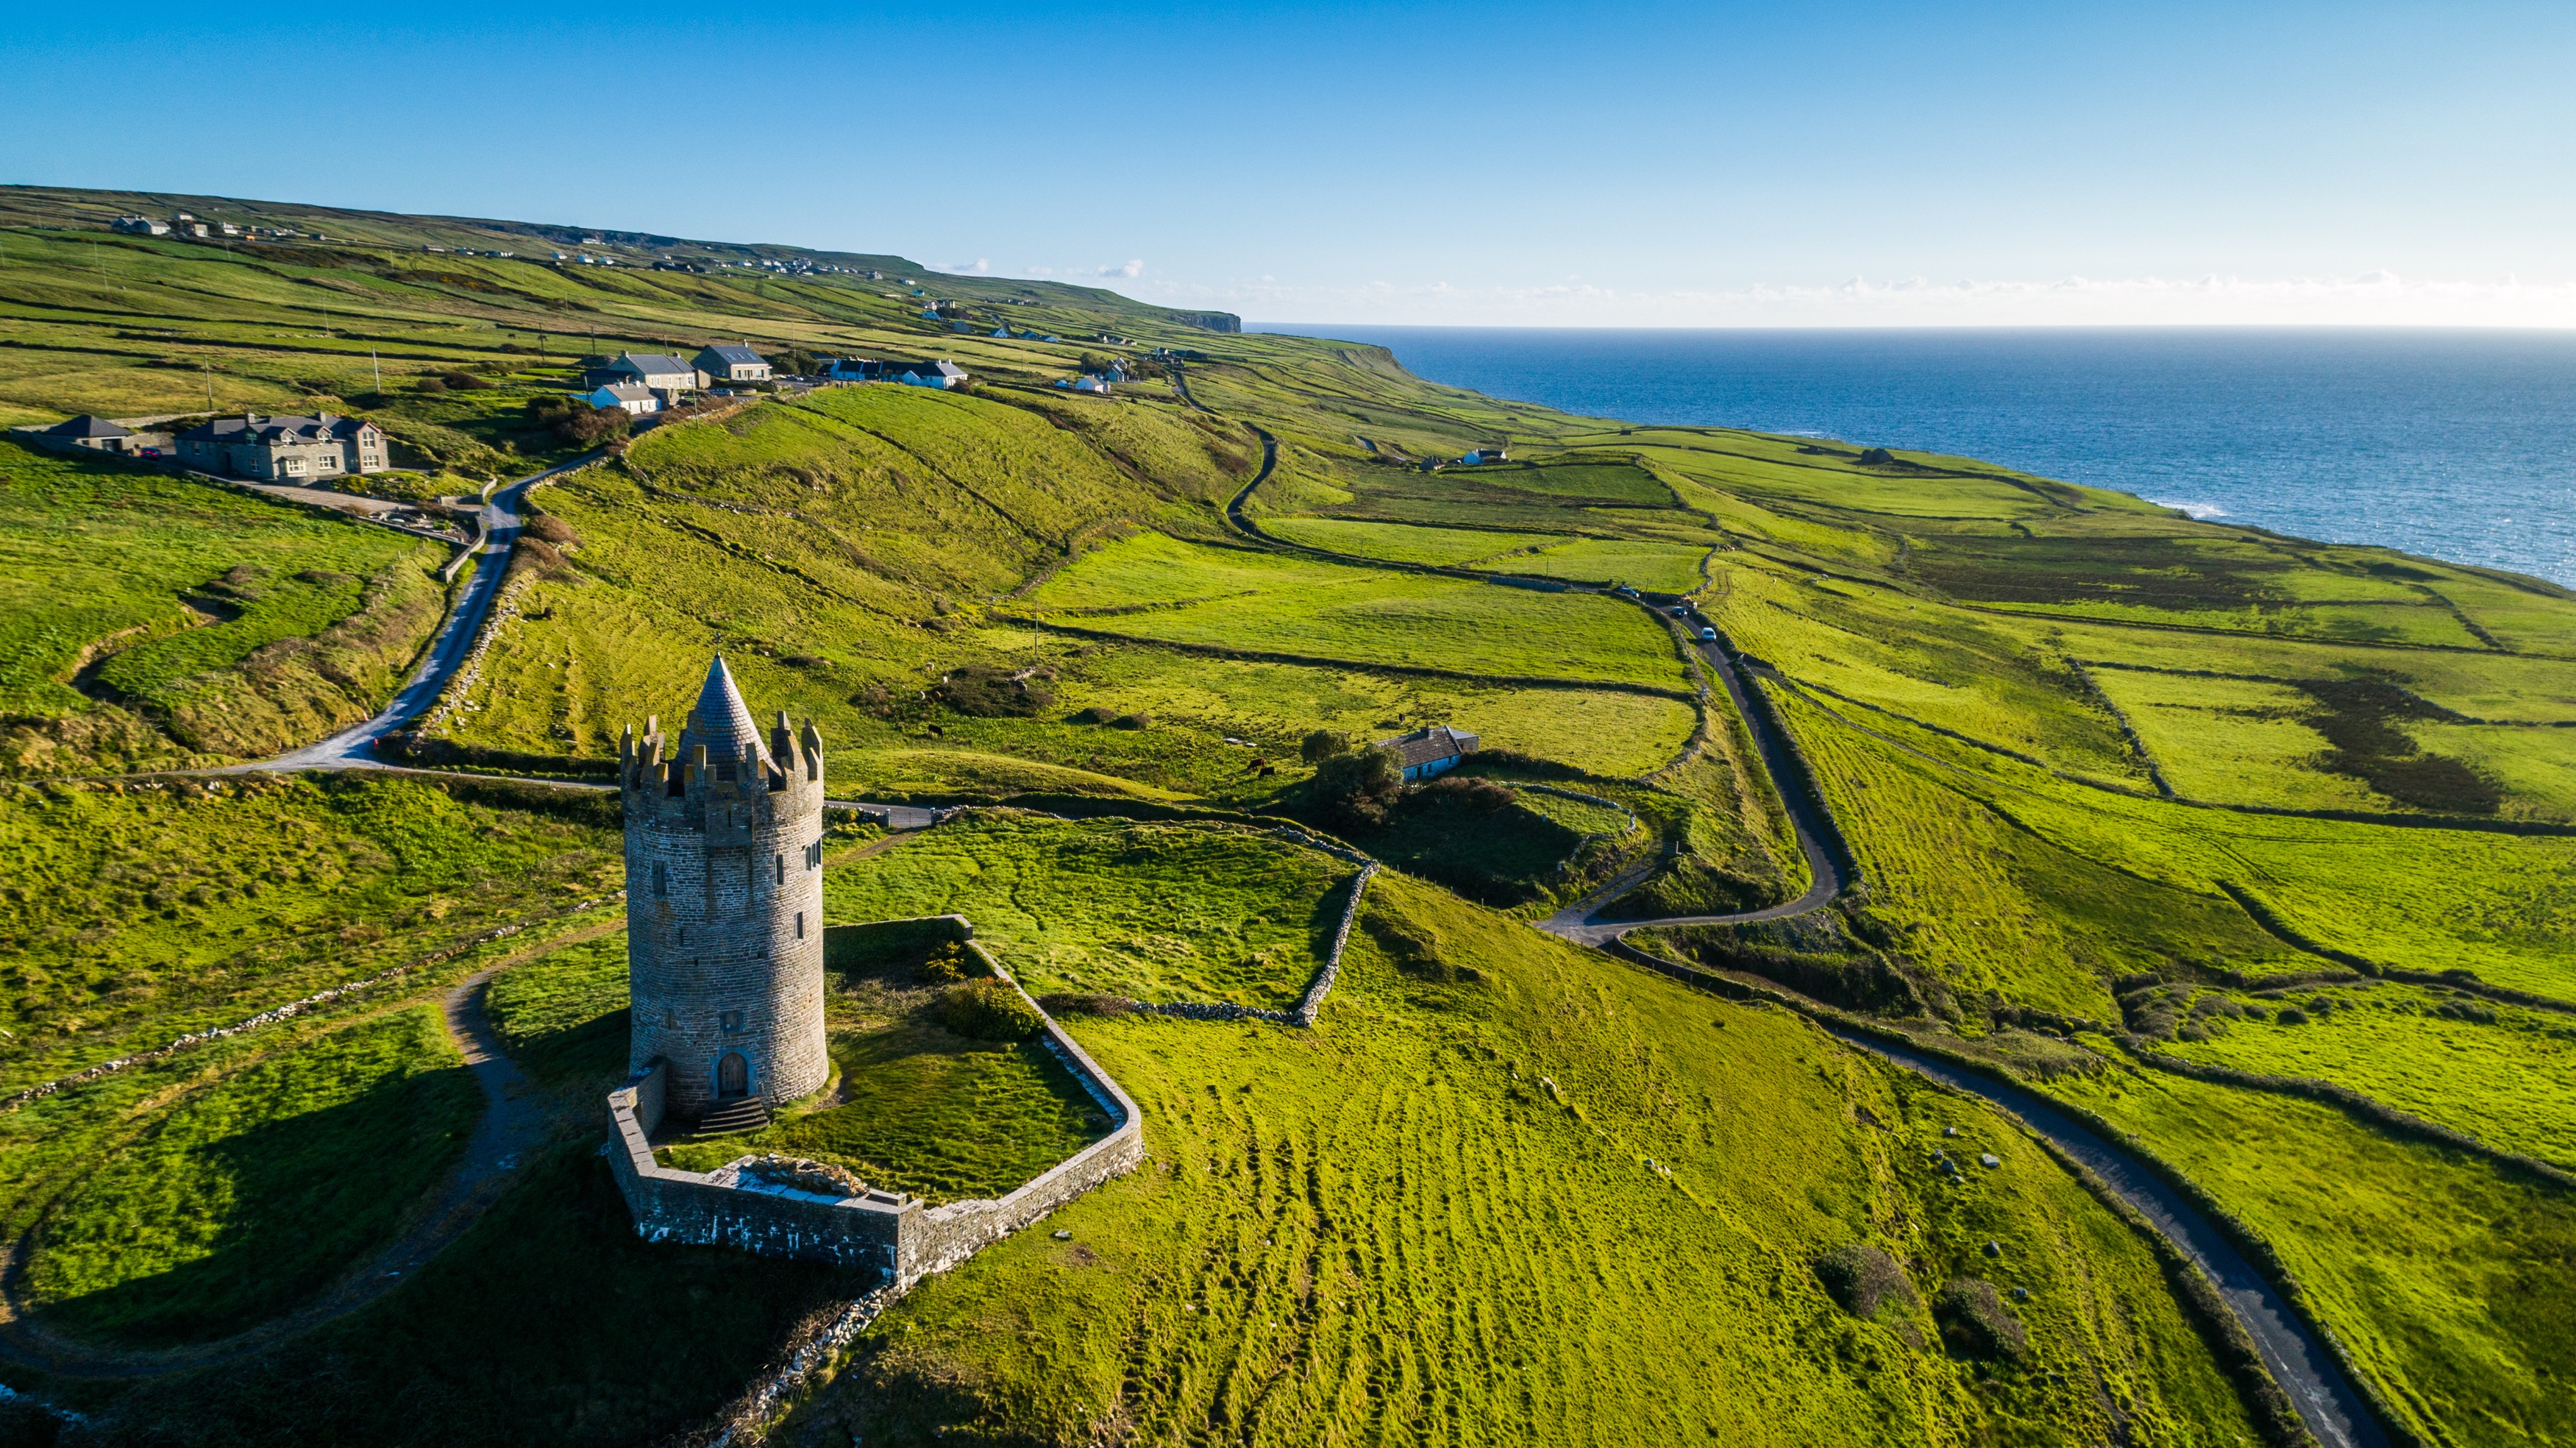 Doonagore Castle is a round 16th-century tower house near Doolin in County Clare. It is a private home, inaccessible to the public.